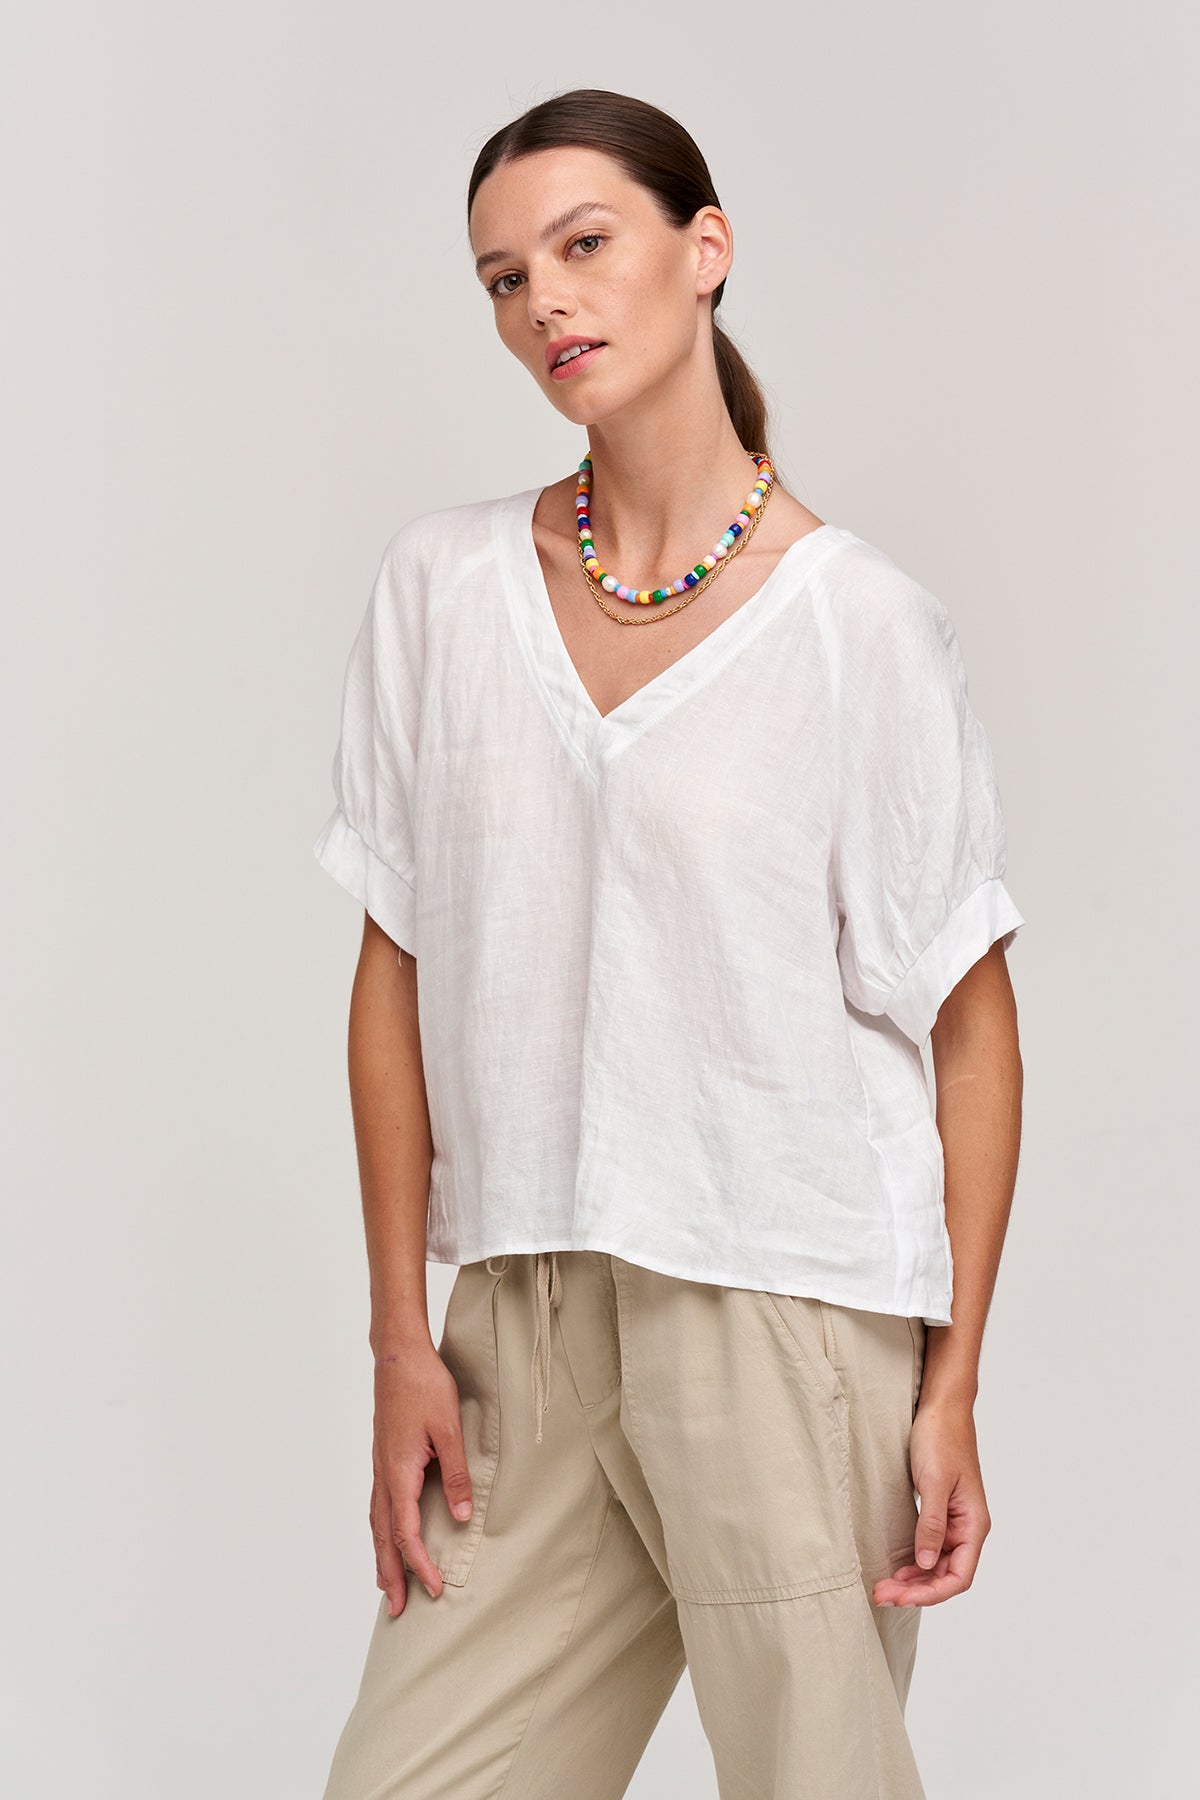 adley top white front-24234116841665